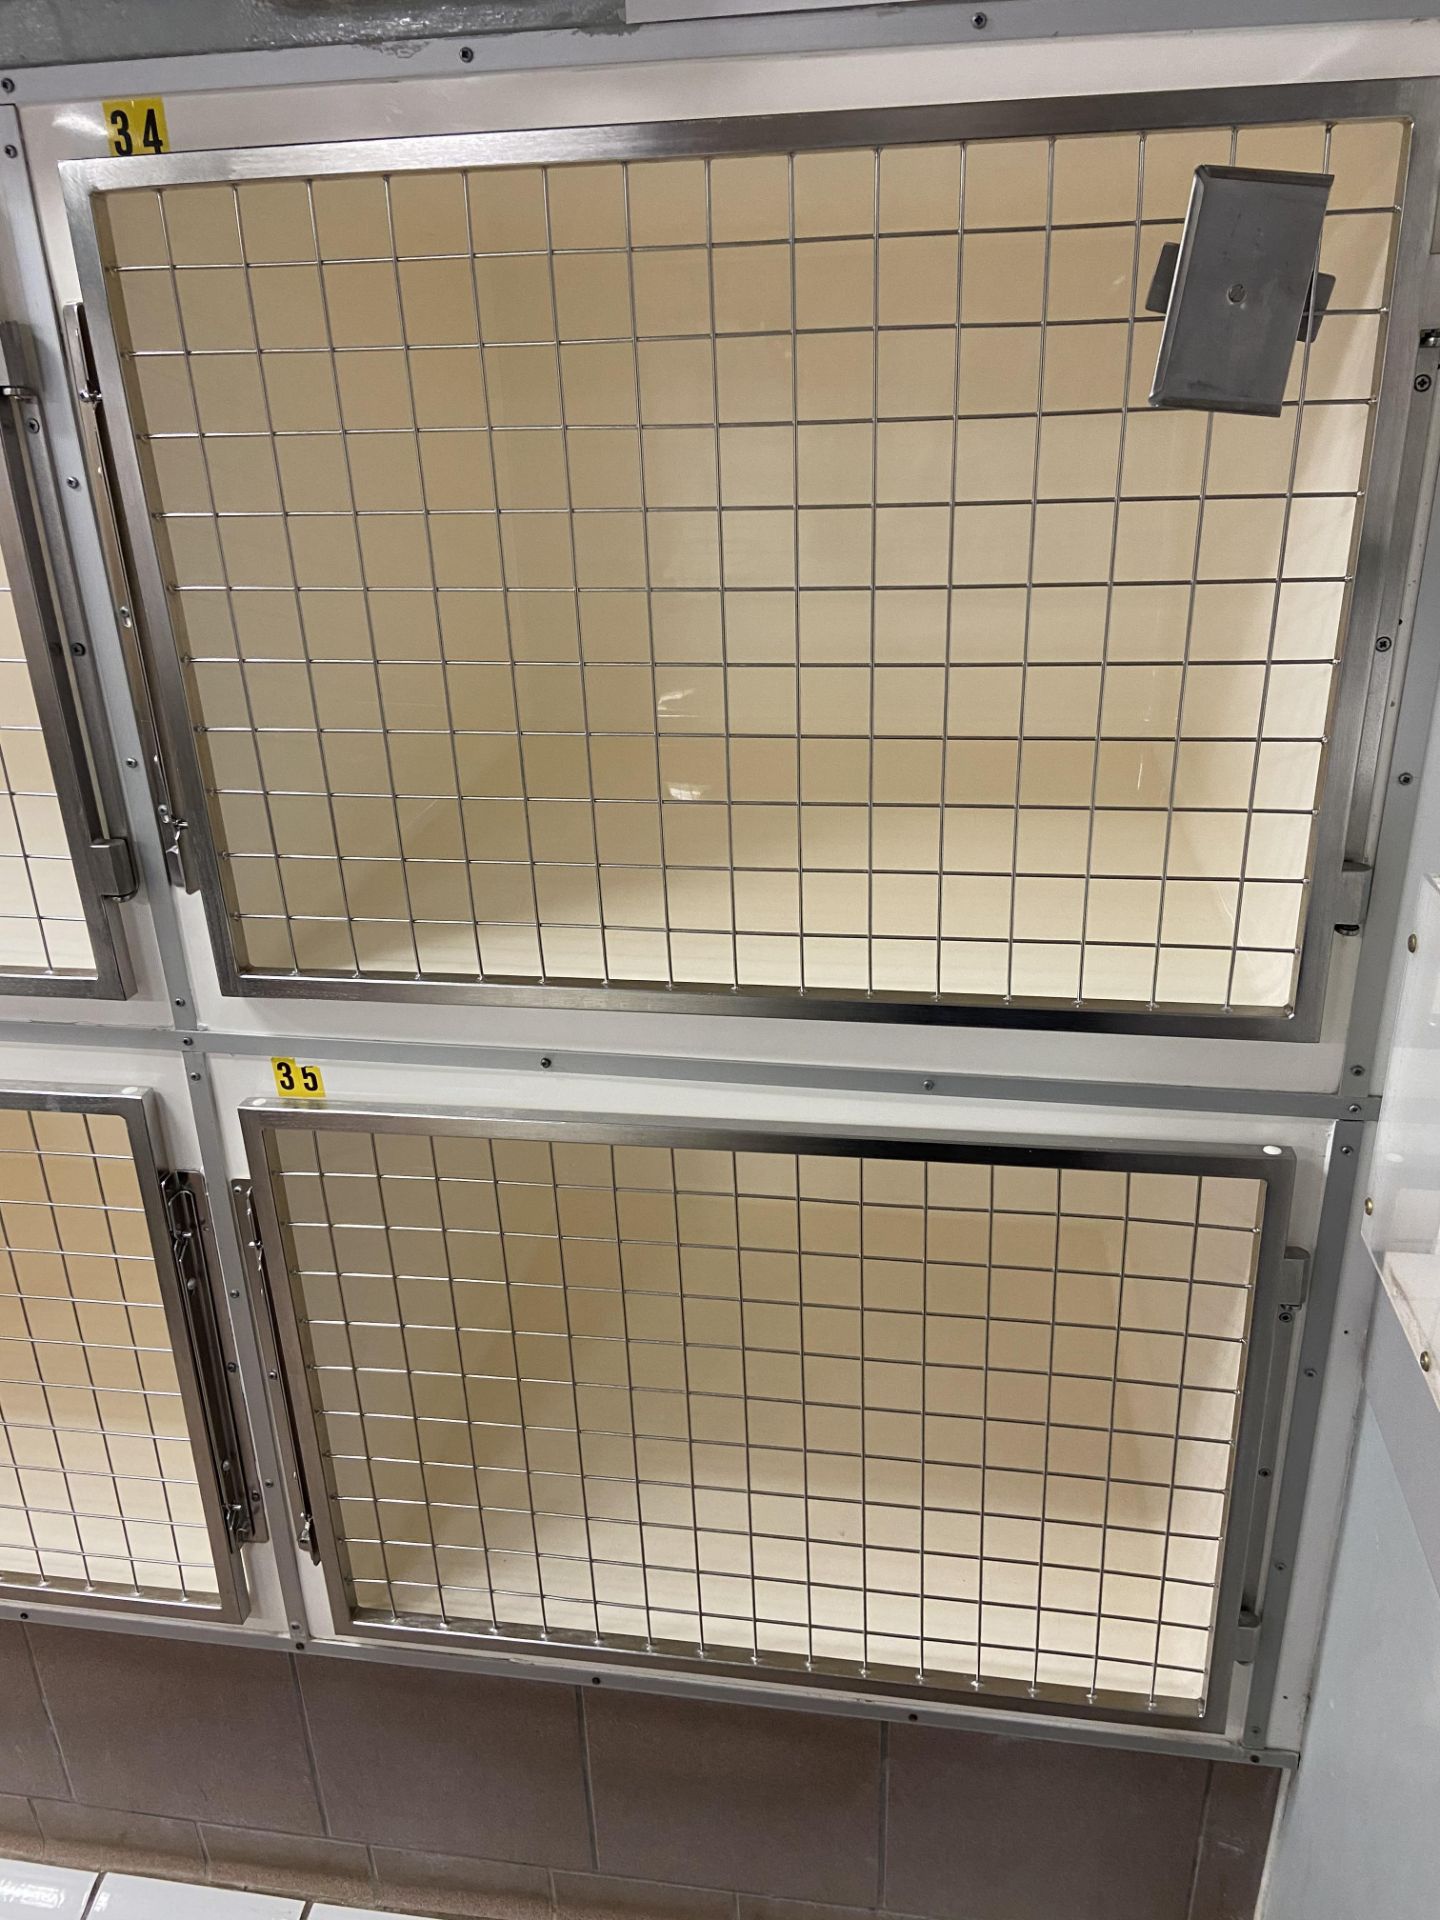 Geeling Ltd, Bank of 8 feline recovery cage kennels with wire cage doors, internal size 810mm x - Image 2 of 2